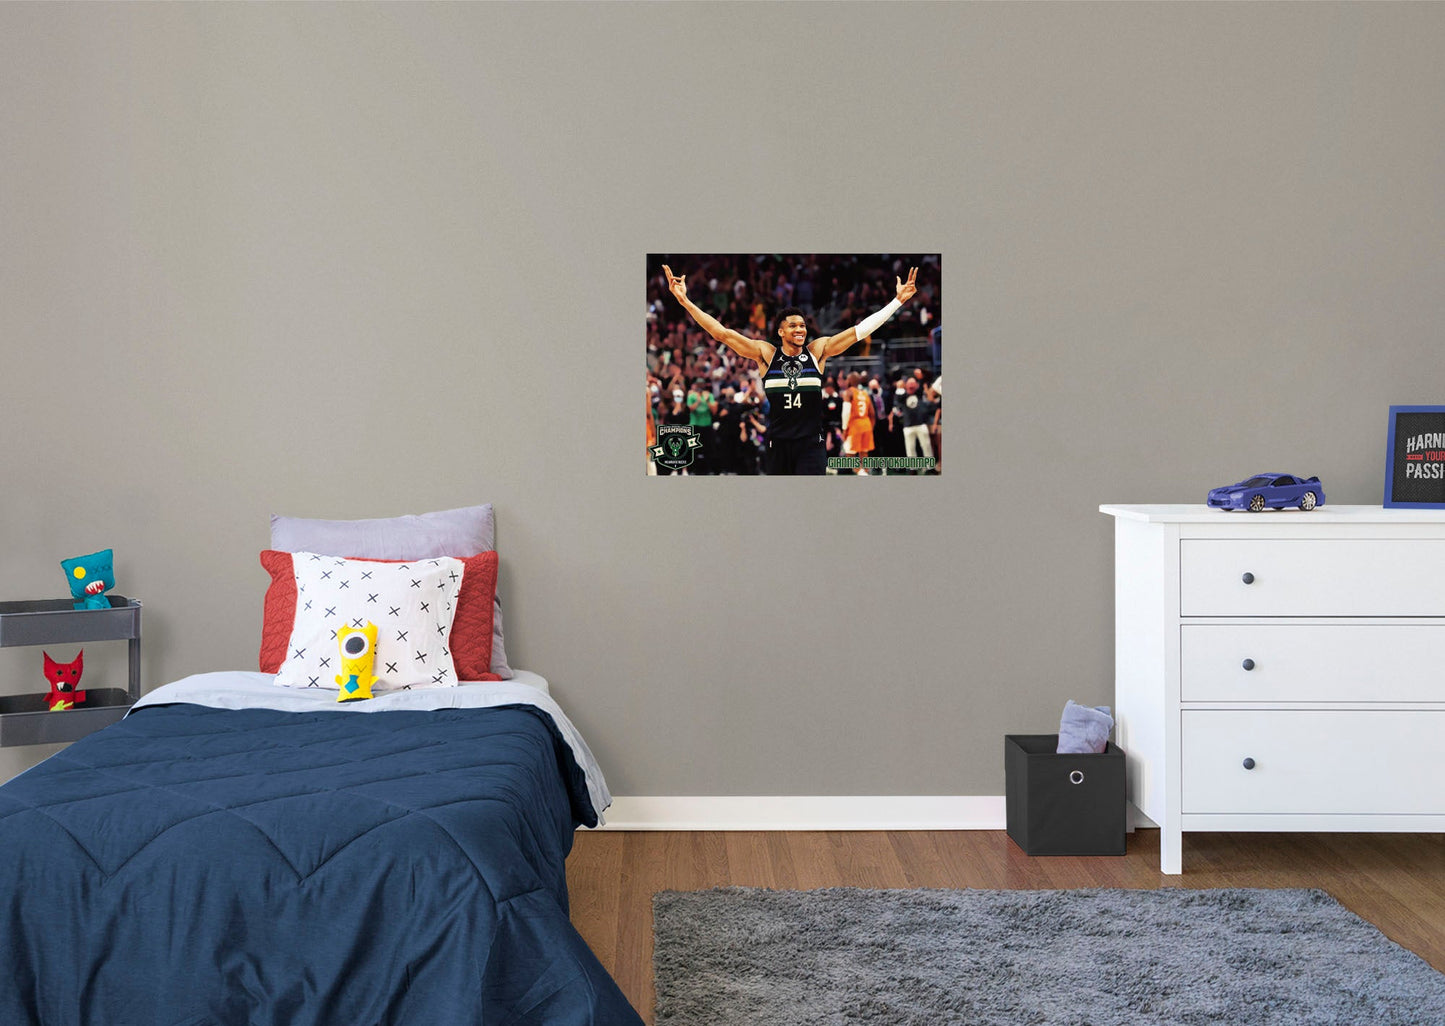 Milwaukee Bucks: Giannis Antetokounmpo 2021 Finals Celebration Mural        - Officially Licensed NBA Removable Wall   Adhesive Decal